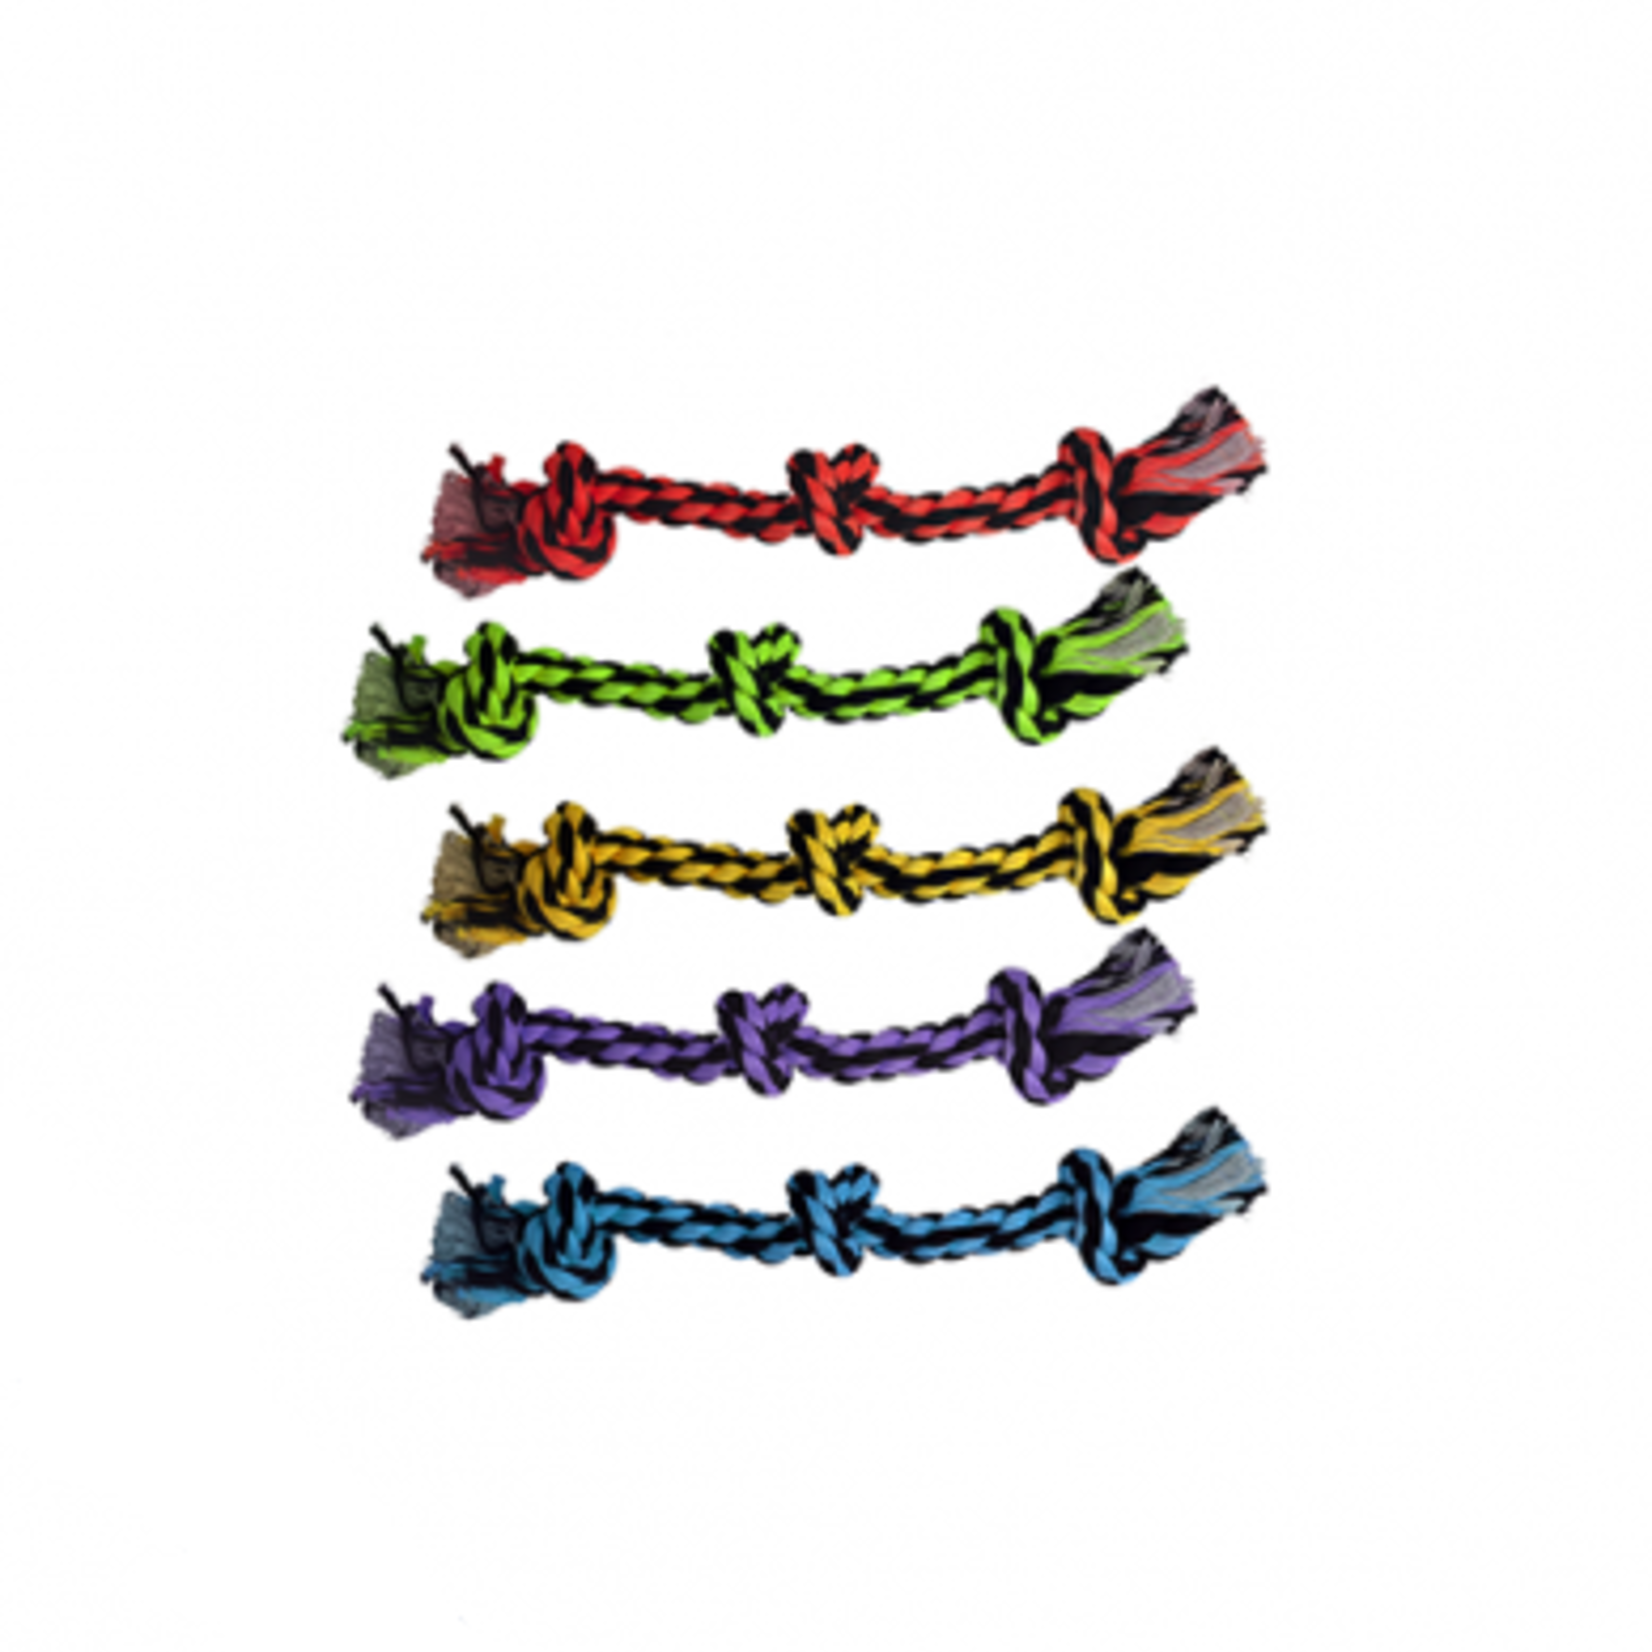 MultiPet Nuts for Knots - 3 Knot Rope - Assorted Colors - 15 in -  sold individually